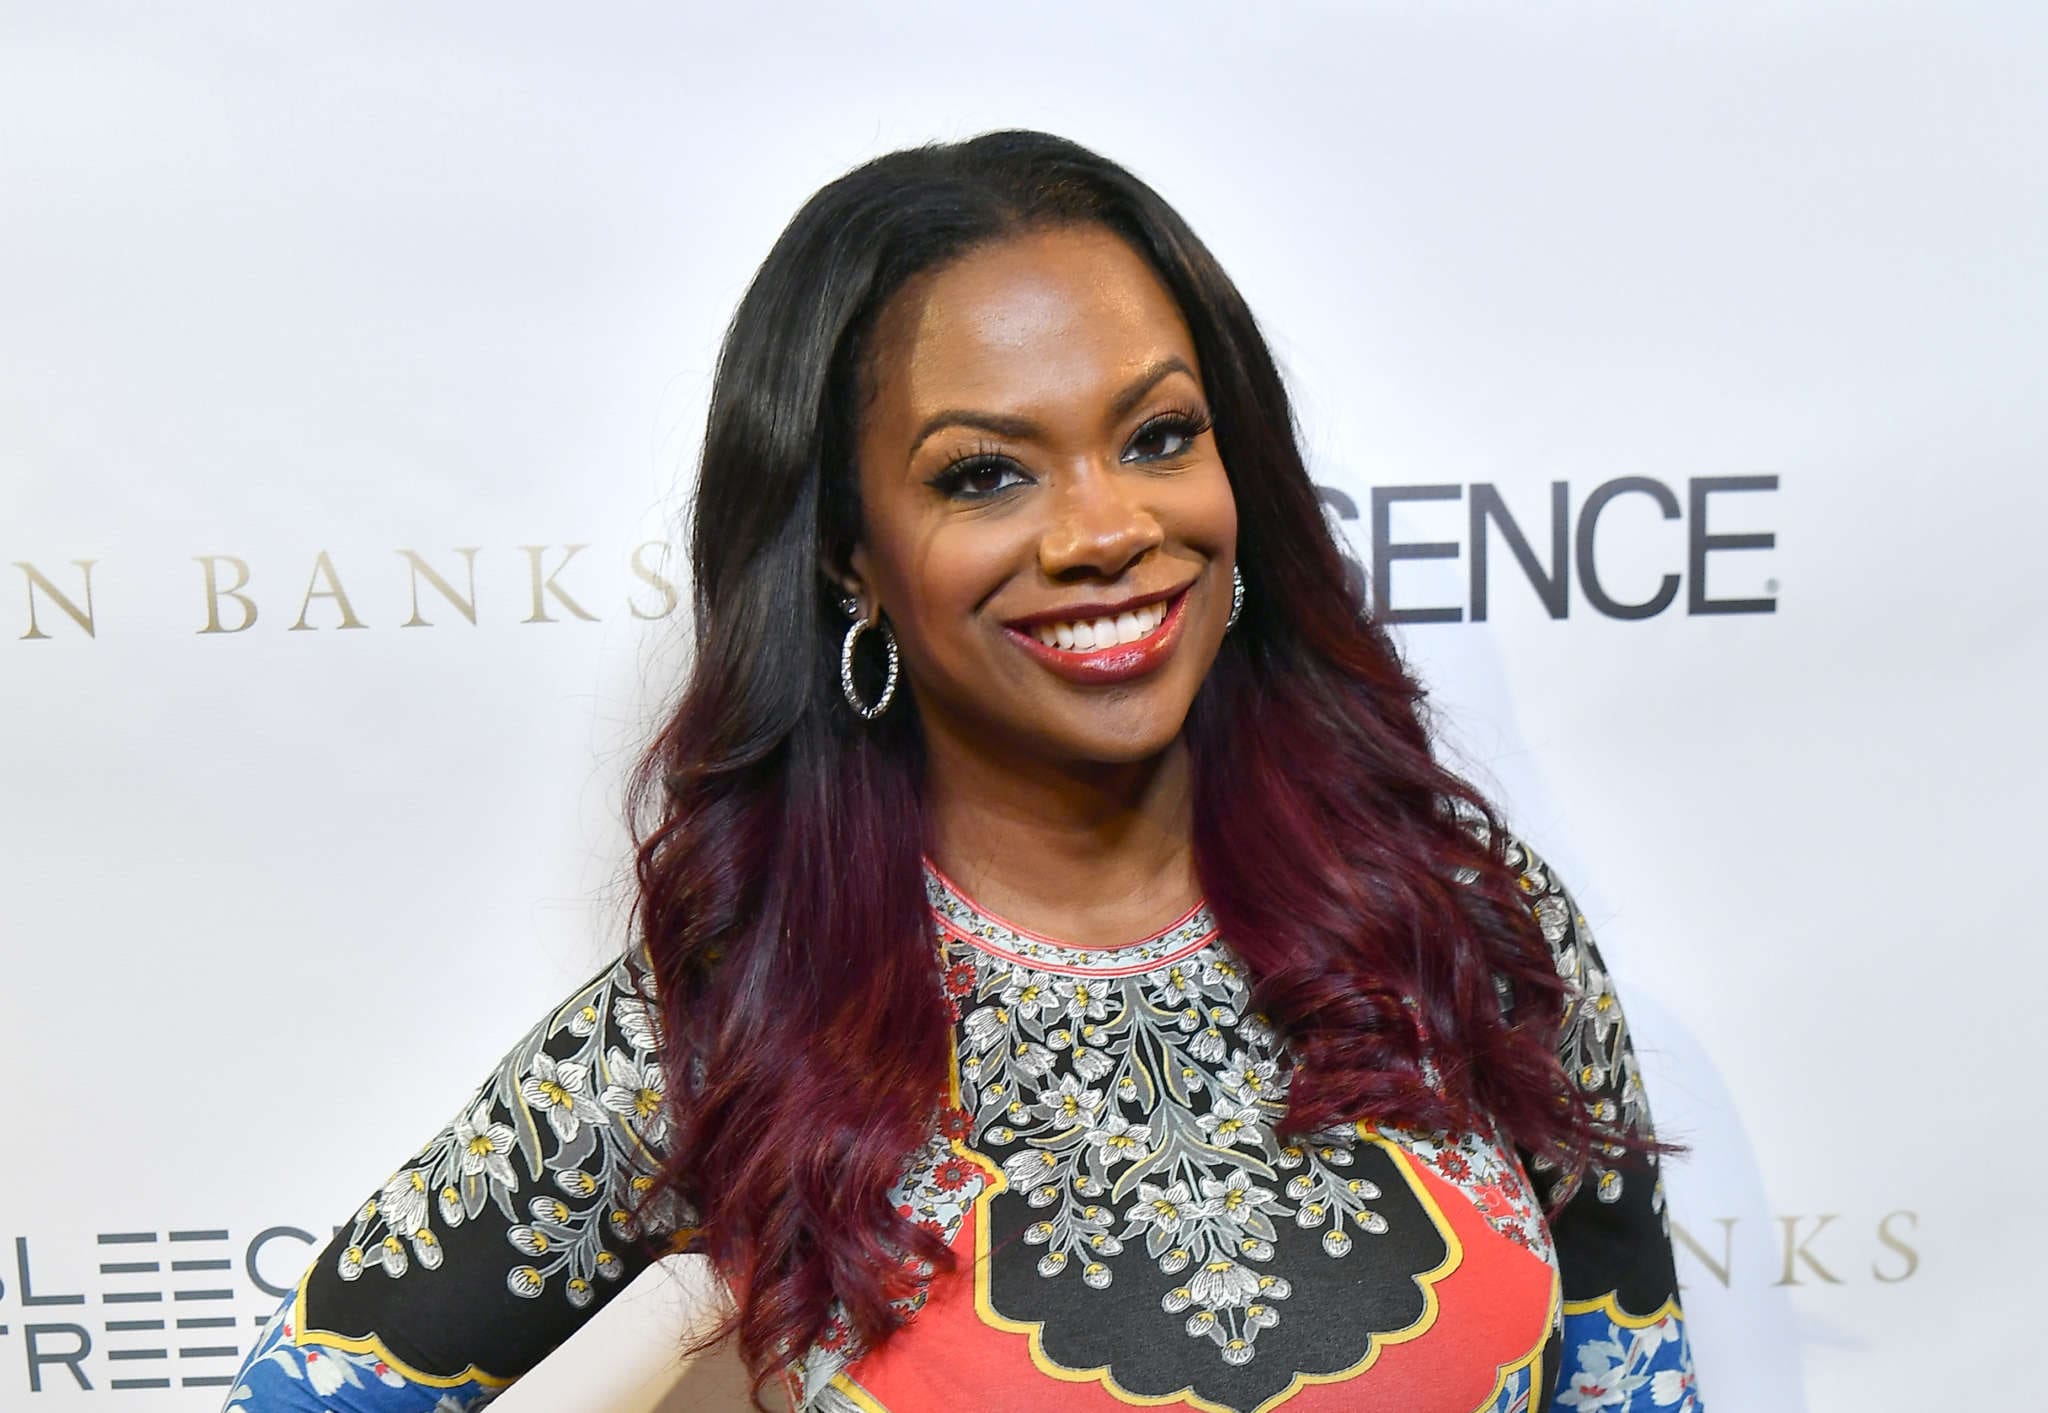 Kandi Burruss Shared A Throwback Photo From RHOA's Season 4, Telling Fans She Wants To Change Her Hair Color